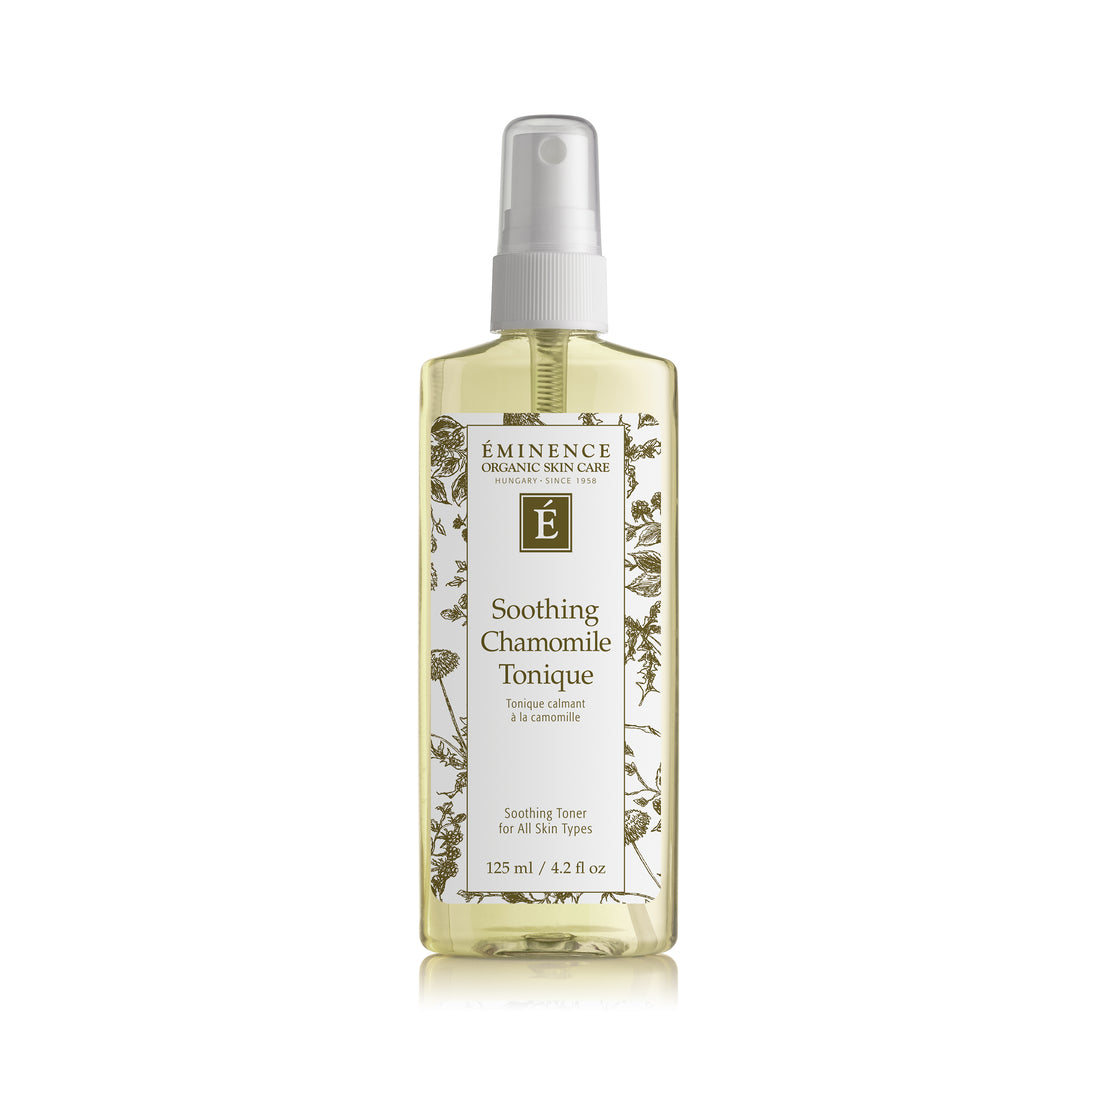 Soothing Chamomile Tonique | Soothing toner for all skin types